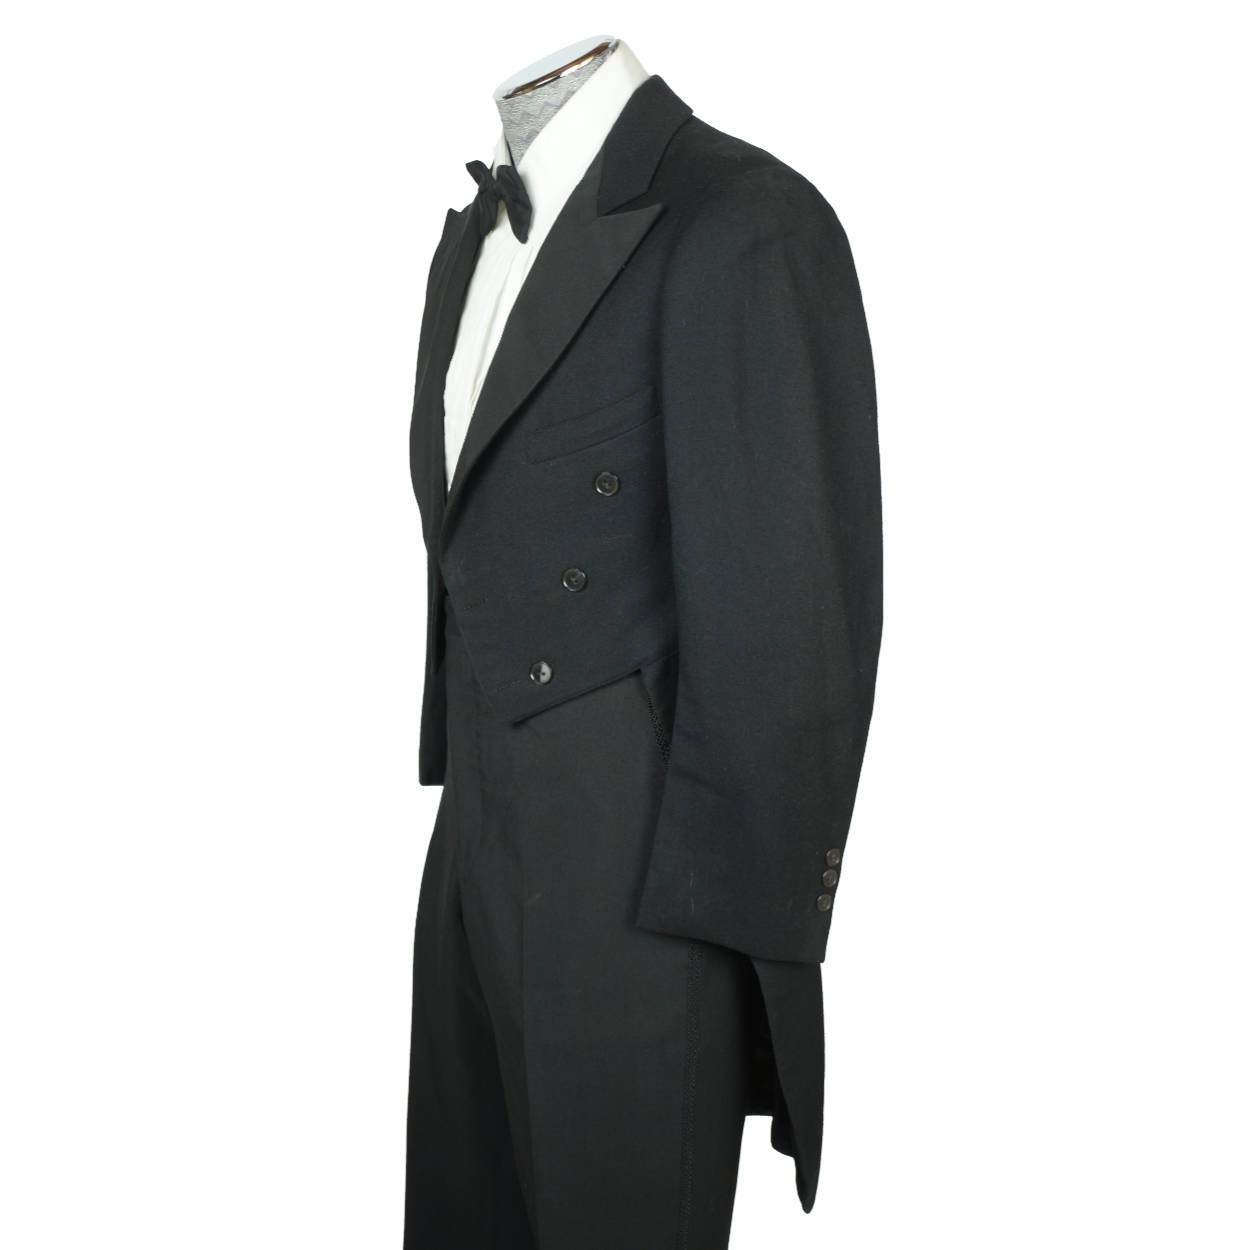 Vintage 1920s Tuxedo Tailcoat Formal Tails Fashion Craft Montreal Size S M